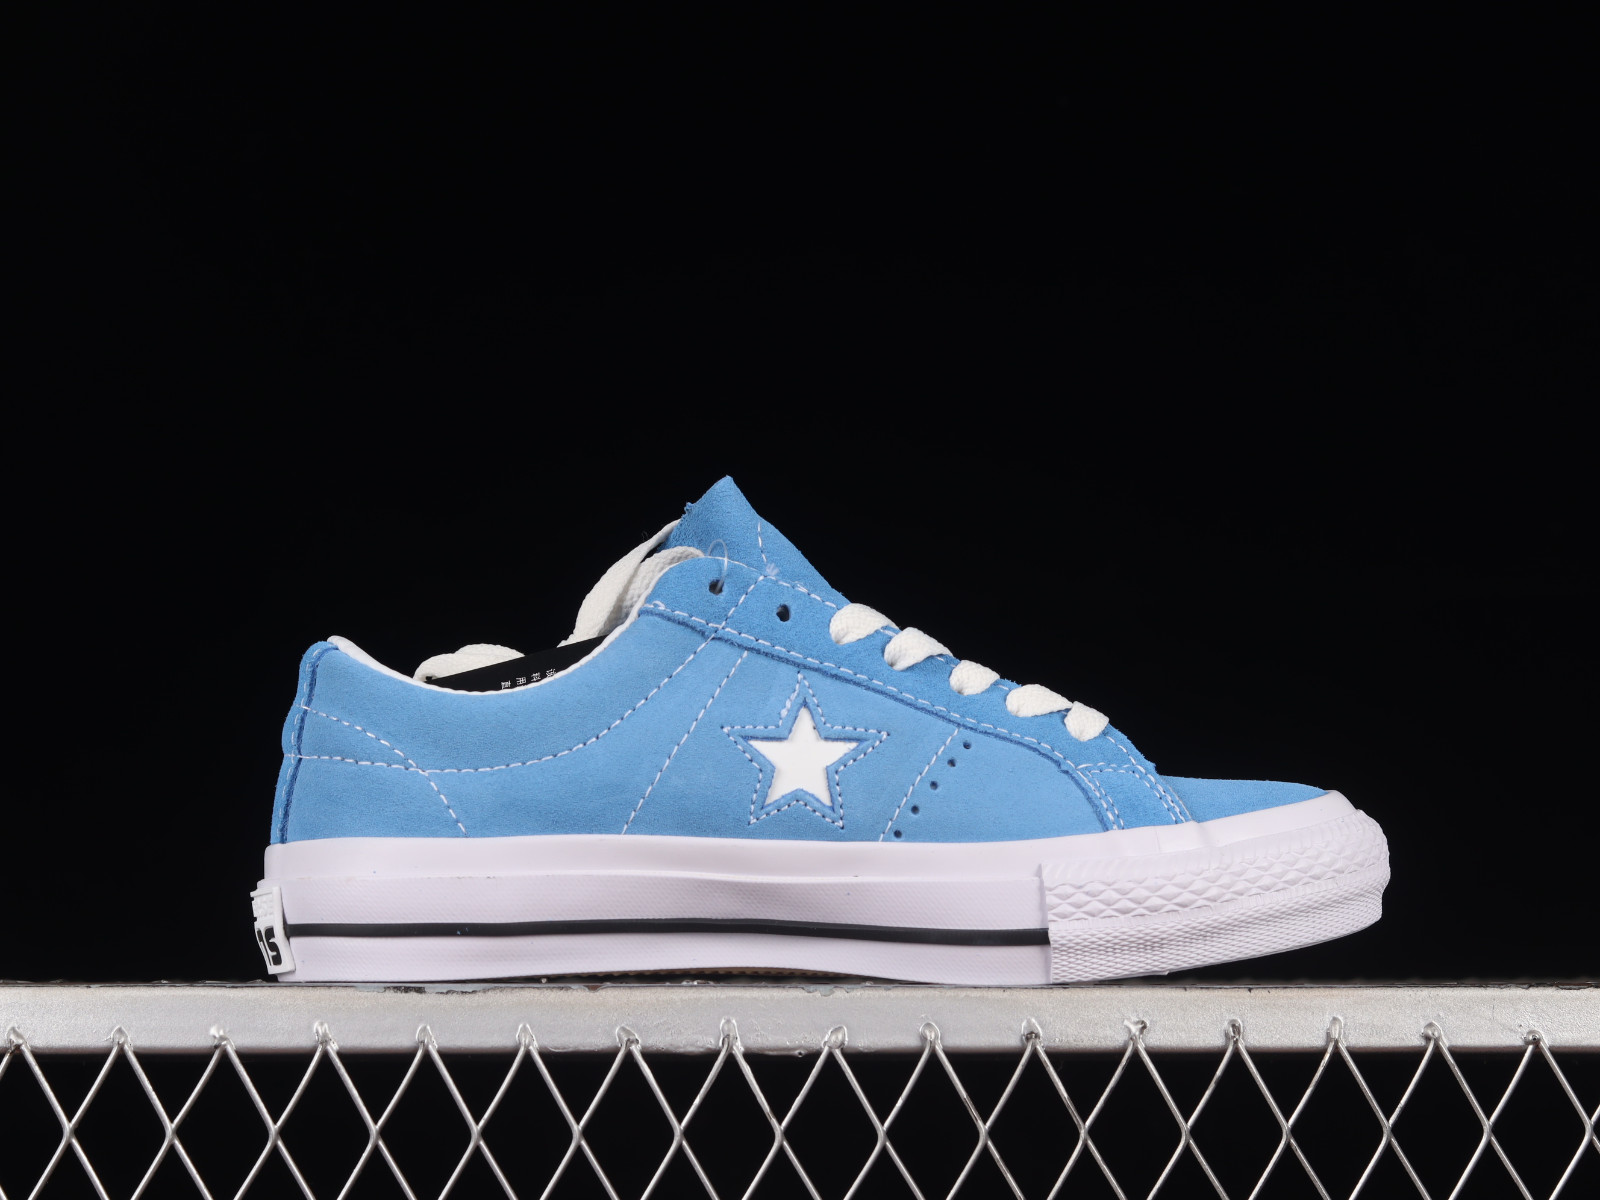 Ewell Especializarse En detalle Converse One Star PRO Suede Blue White A00940C - MultiscaleconsultingShops